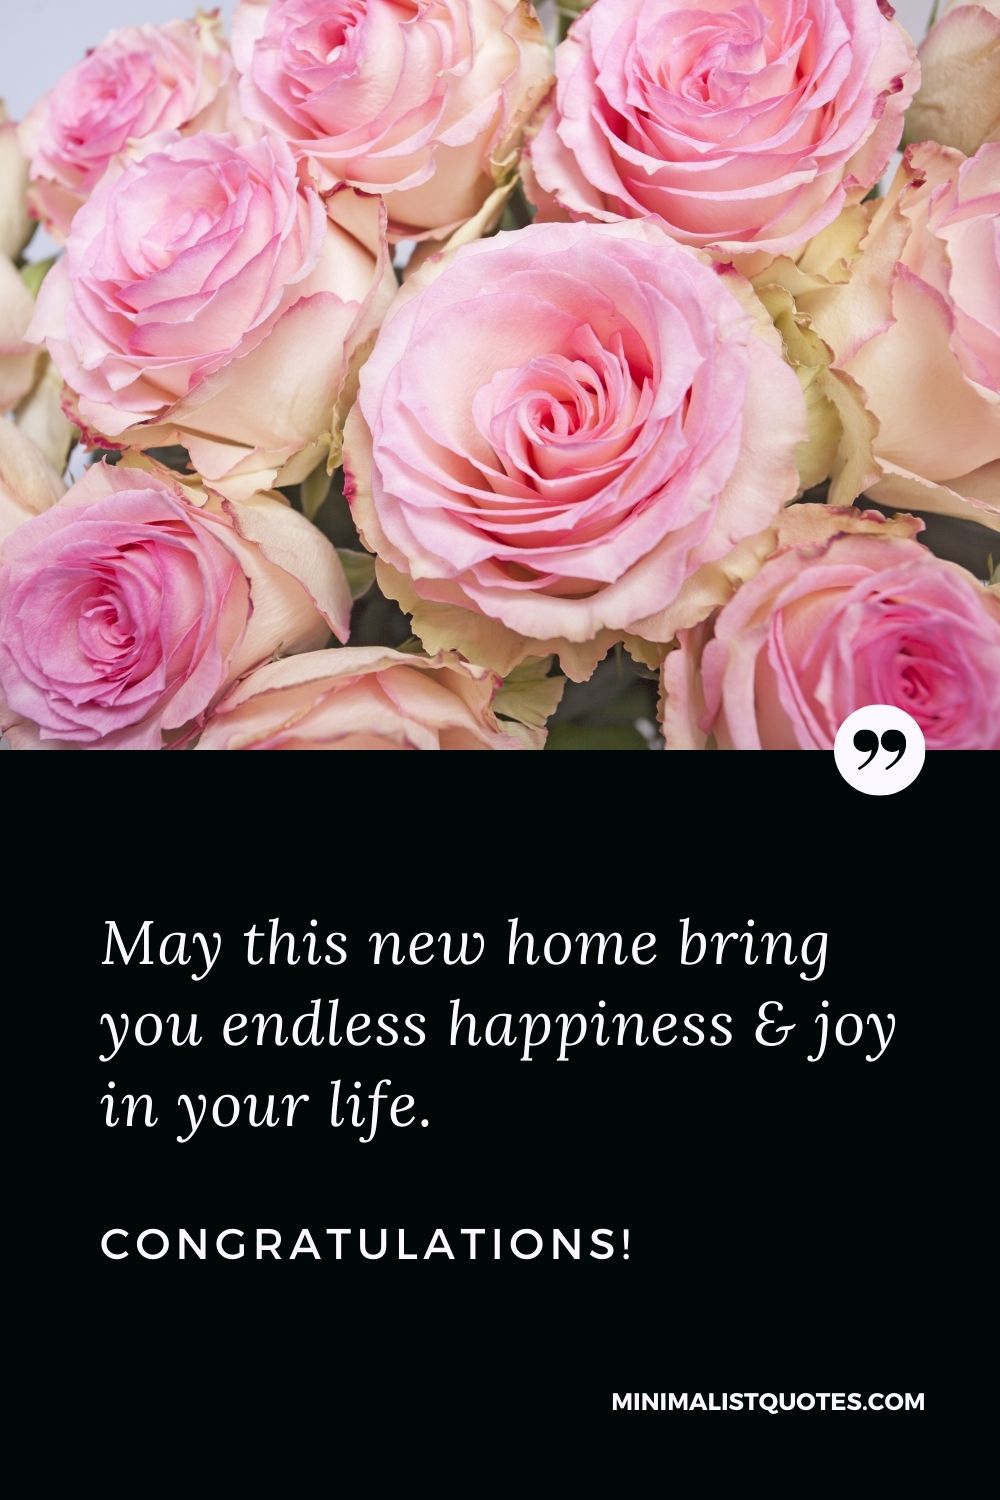 New Home Wish, Quote & Message With Image: May this new home bring you endless happiness & joy in your life. Congratulations!